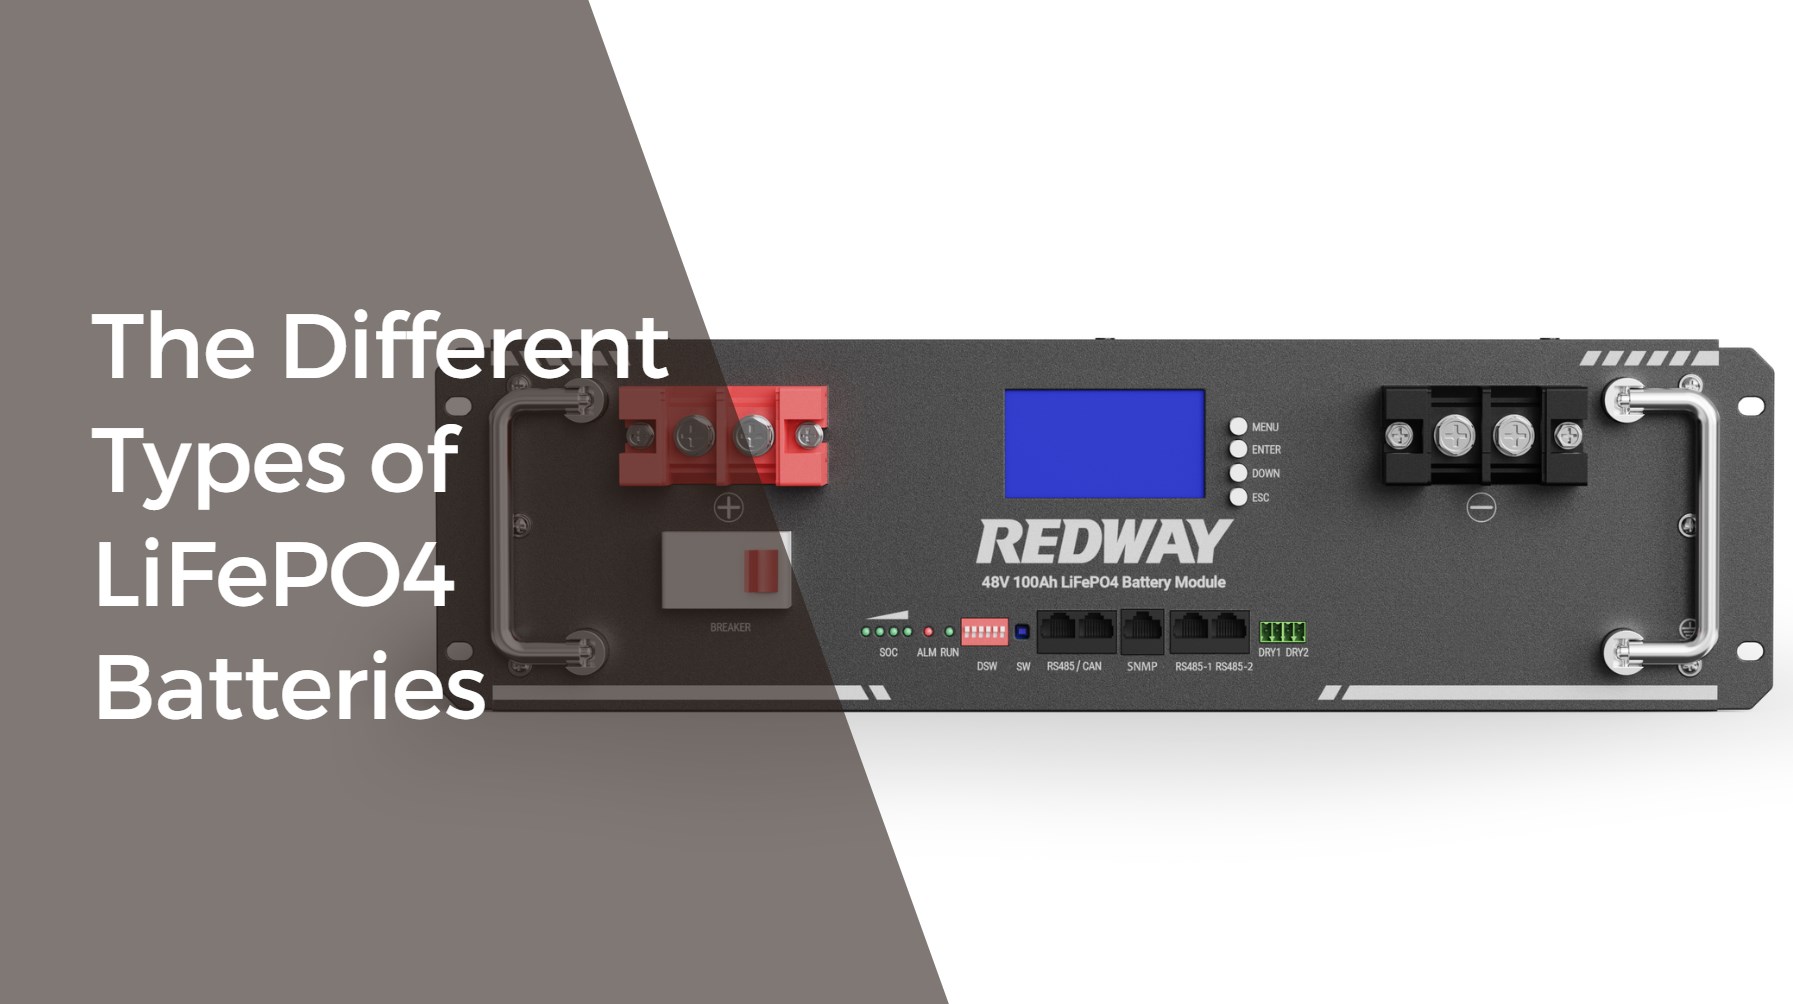 The Different Types of LiFePO4 Batteries. PM-LV48100. server rack battery 48v 100ah redway factory